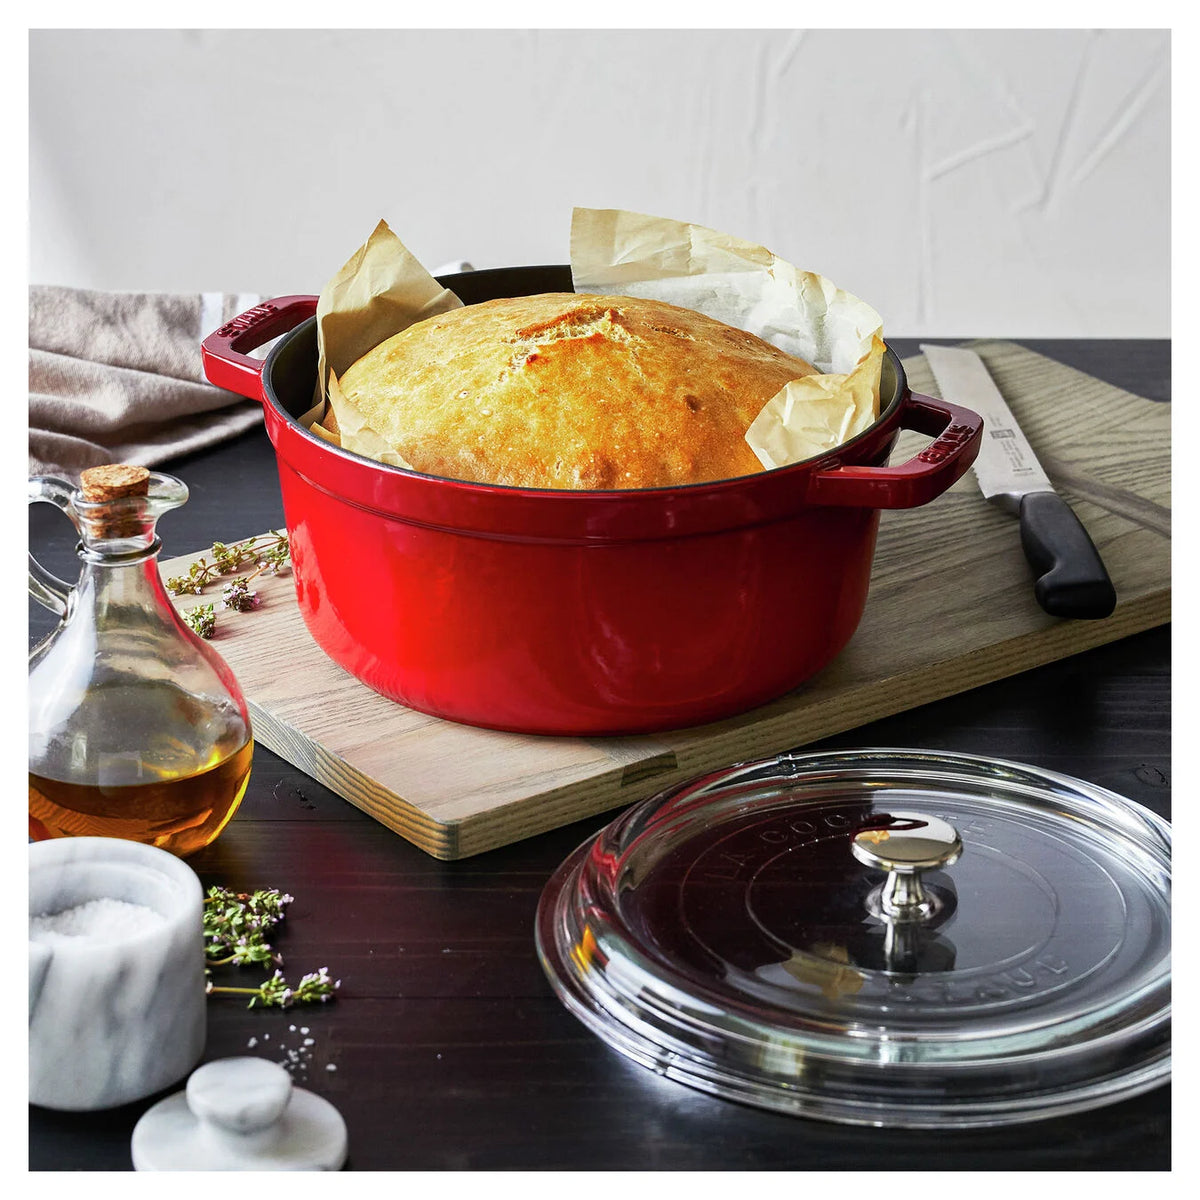 Buy Staub Cast Iron - Specialty Items Loaf pan